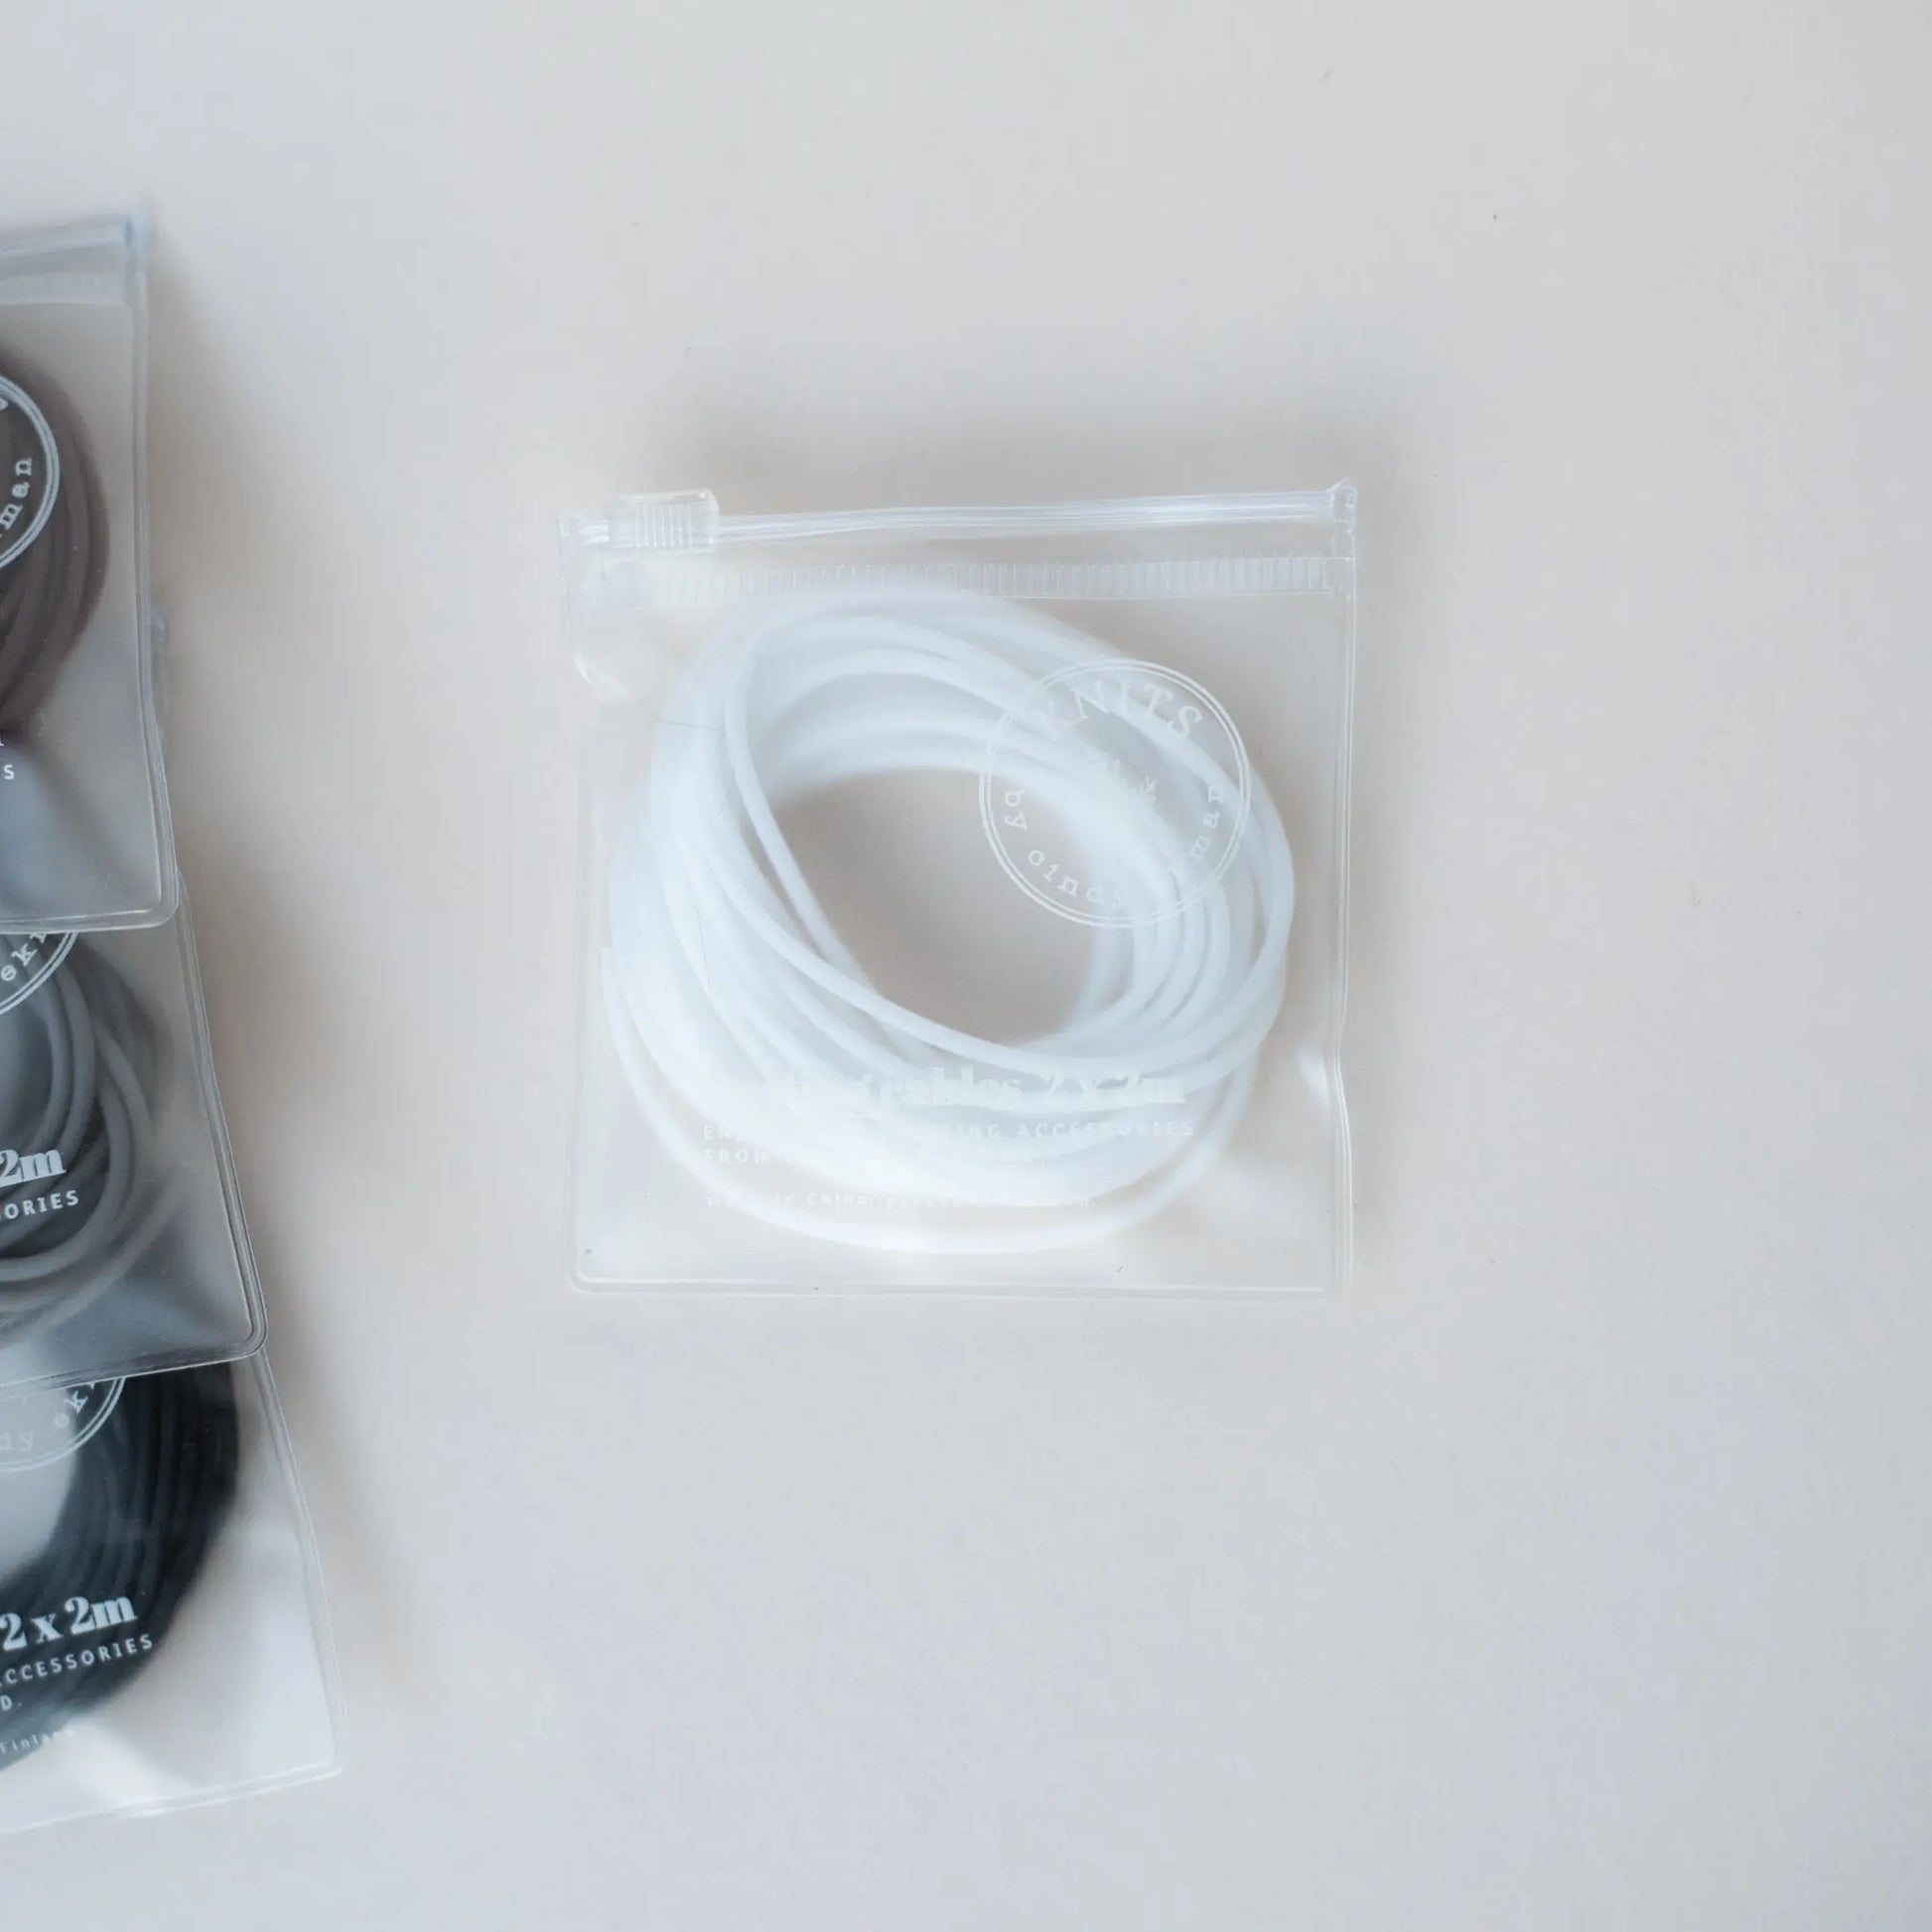 Resting cables in ziplock bags